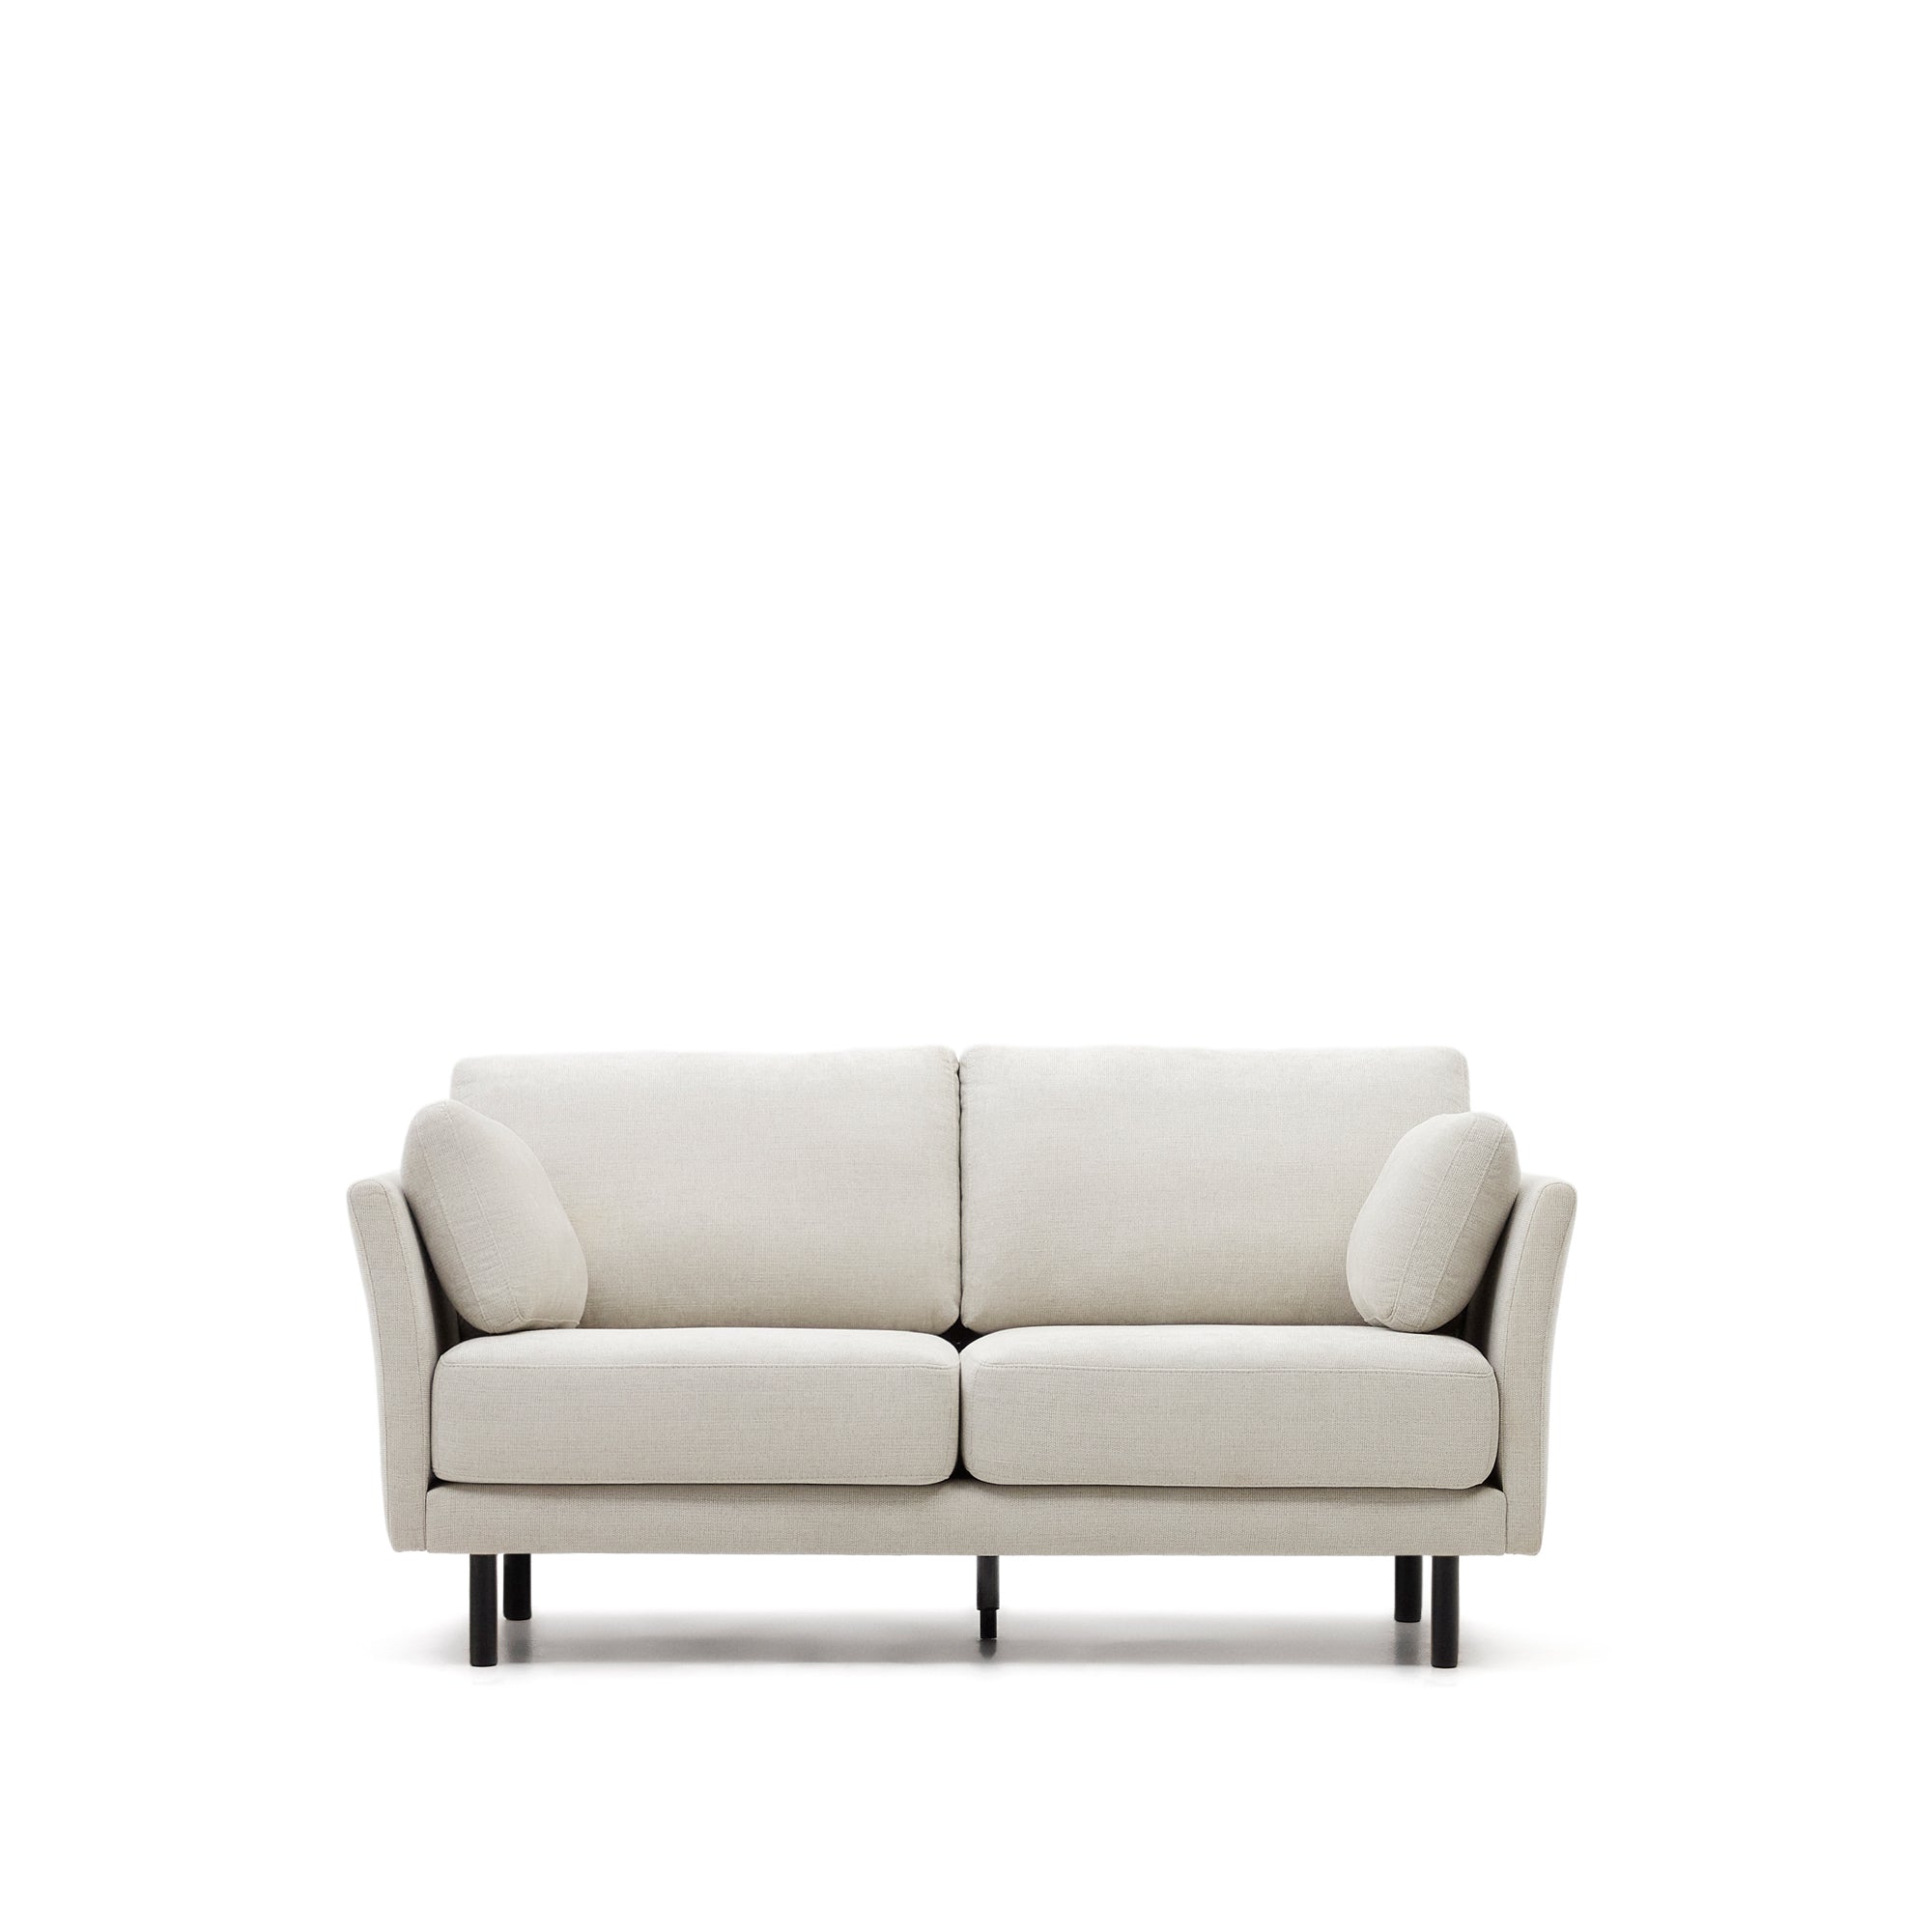 Gilma 2 seater sofa in chenille pearl with painted black finish legs, 170 cm